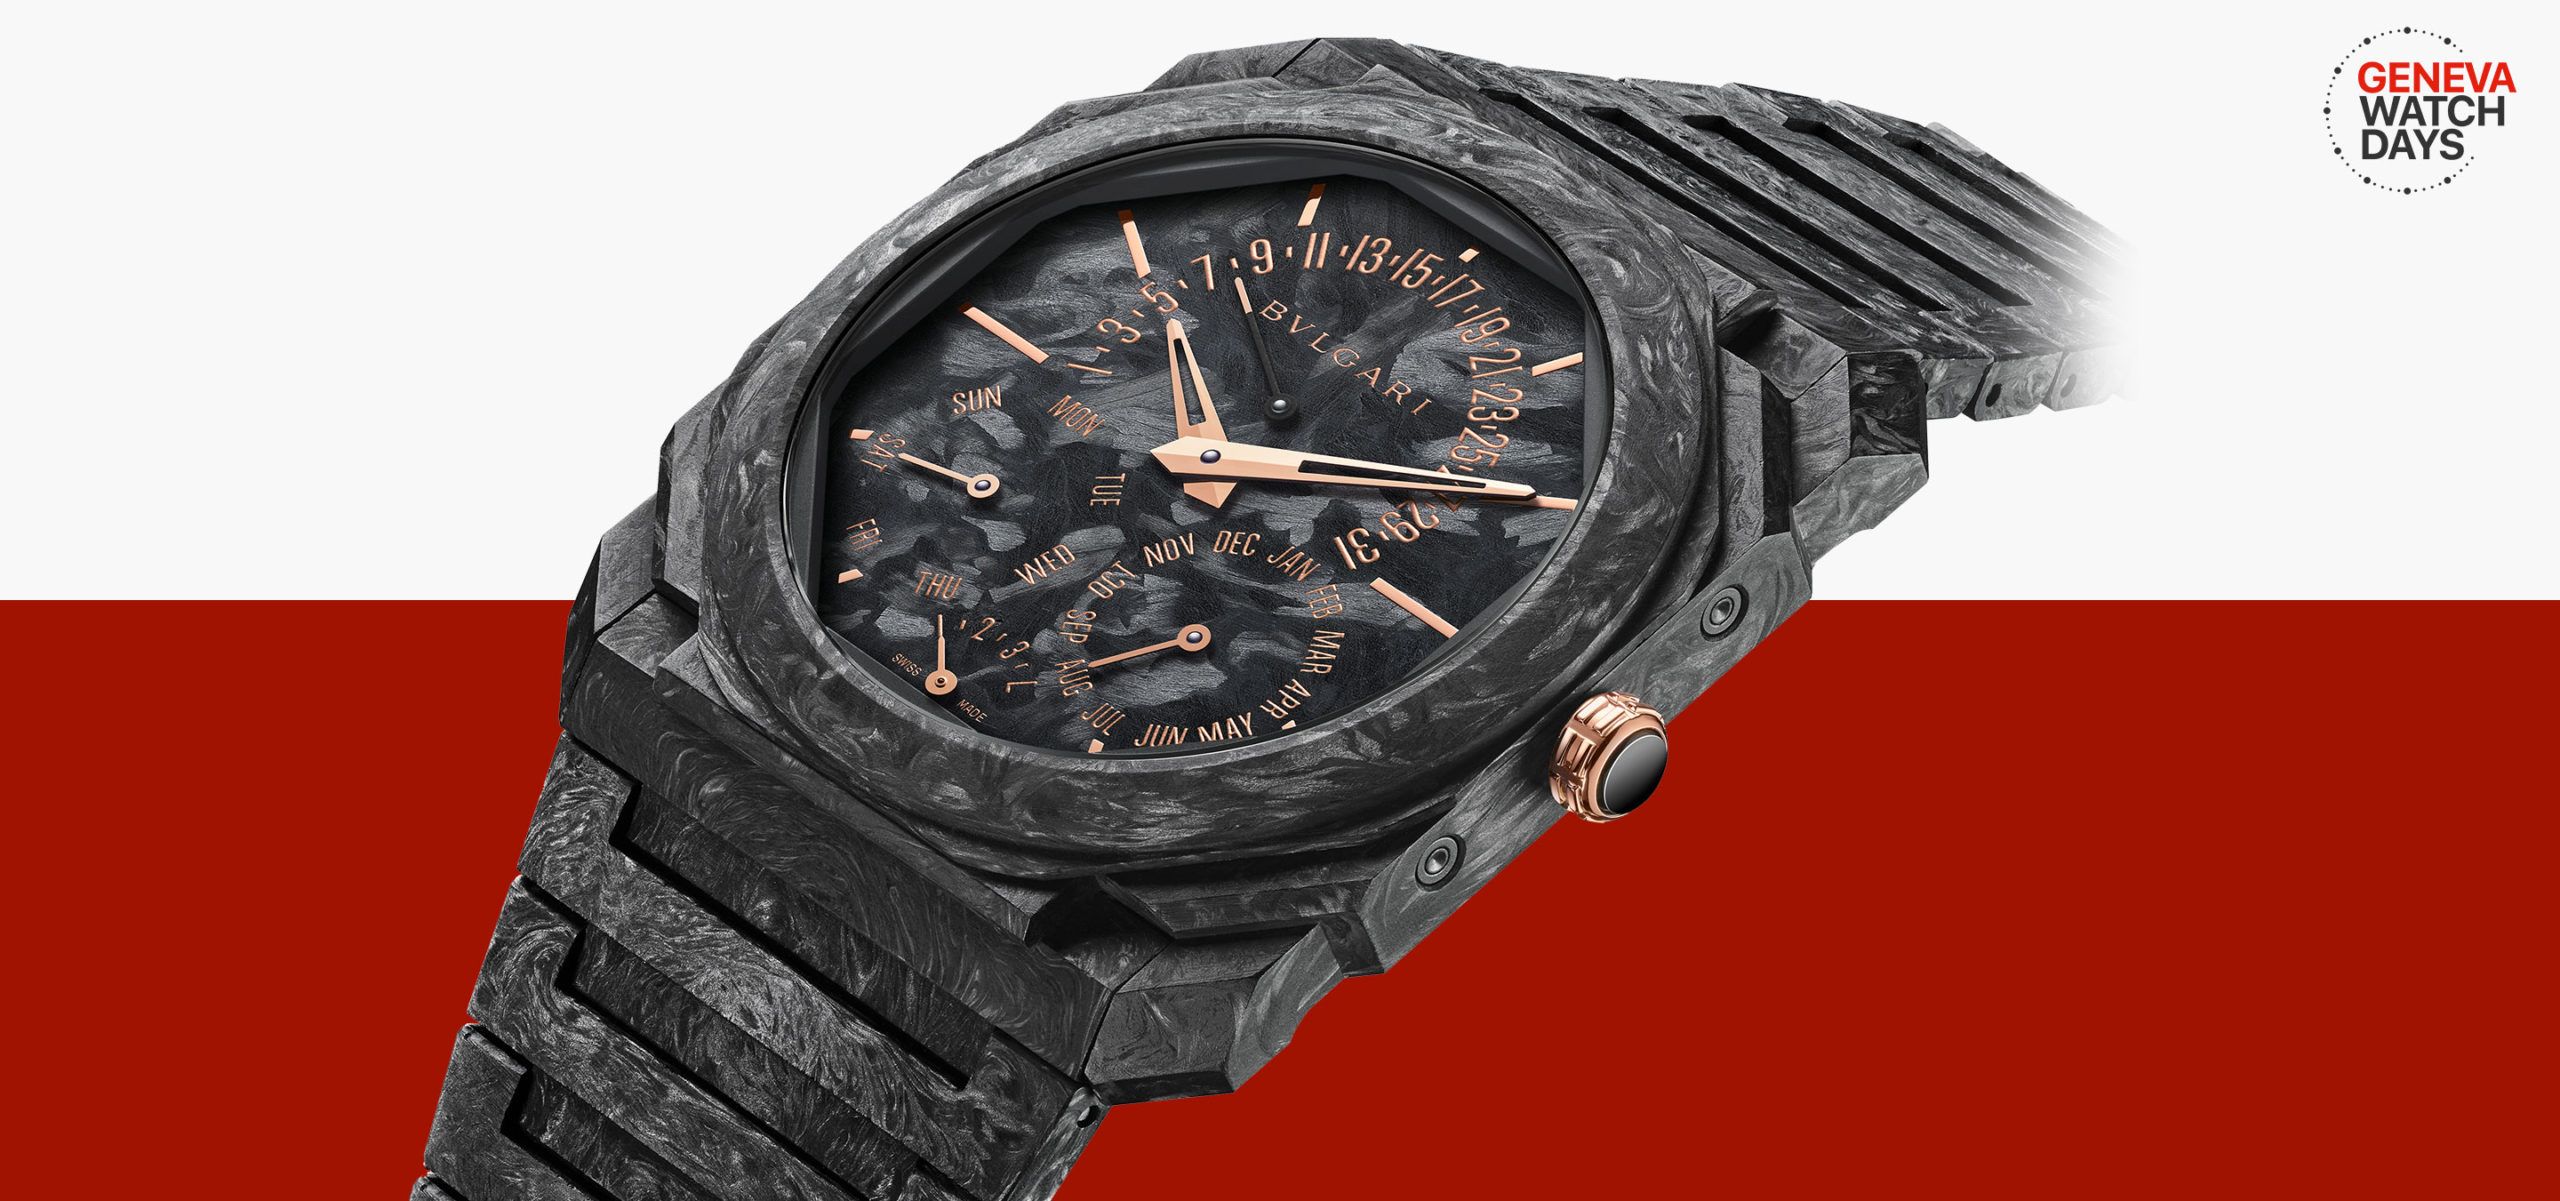 Lightweight And Gilded: Bulgari Present Two New Octo Finissimo Watches In Carbon And Gold